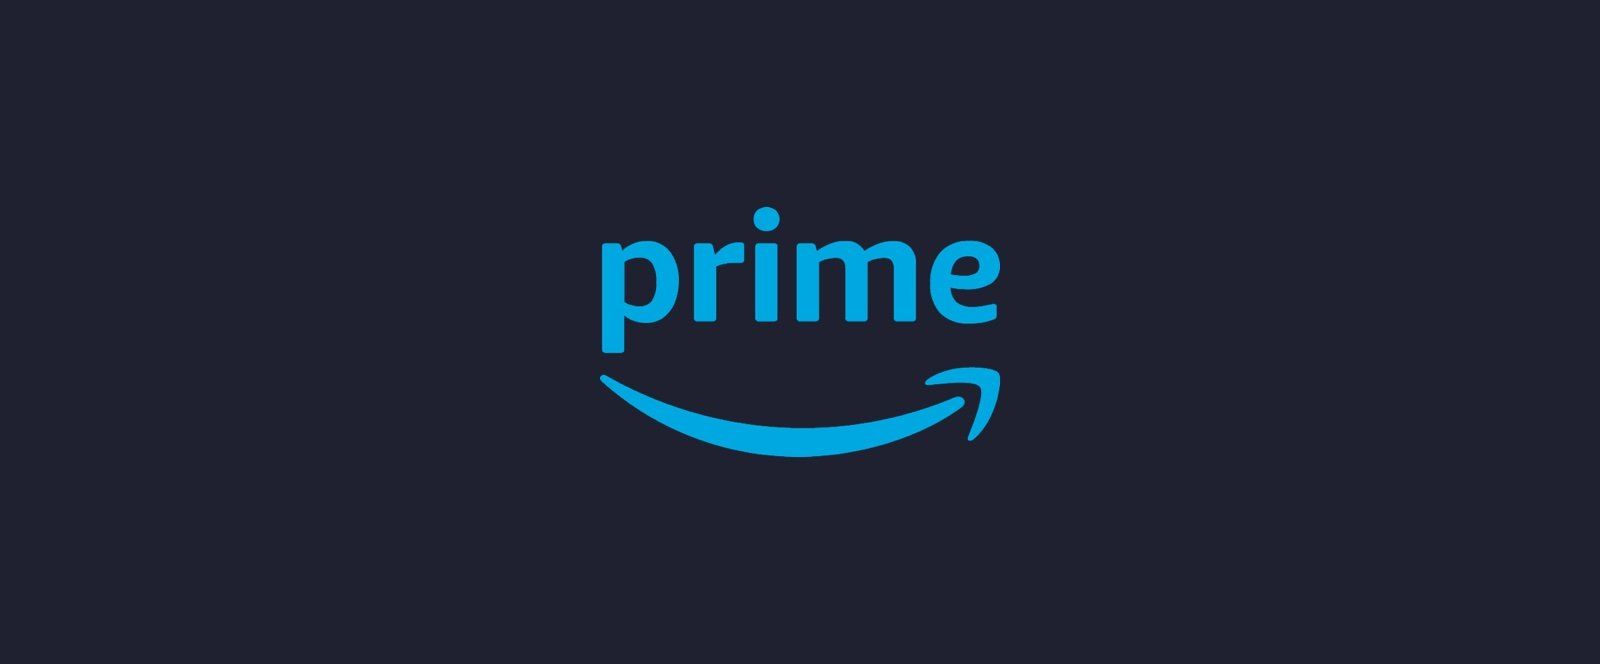 Amazon Prime Review: It Made Me Spend $18k Over 5 Years